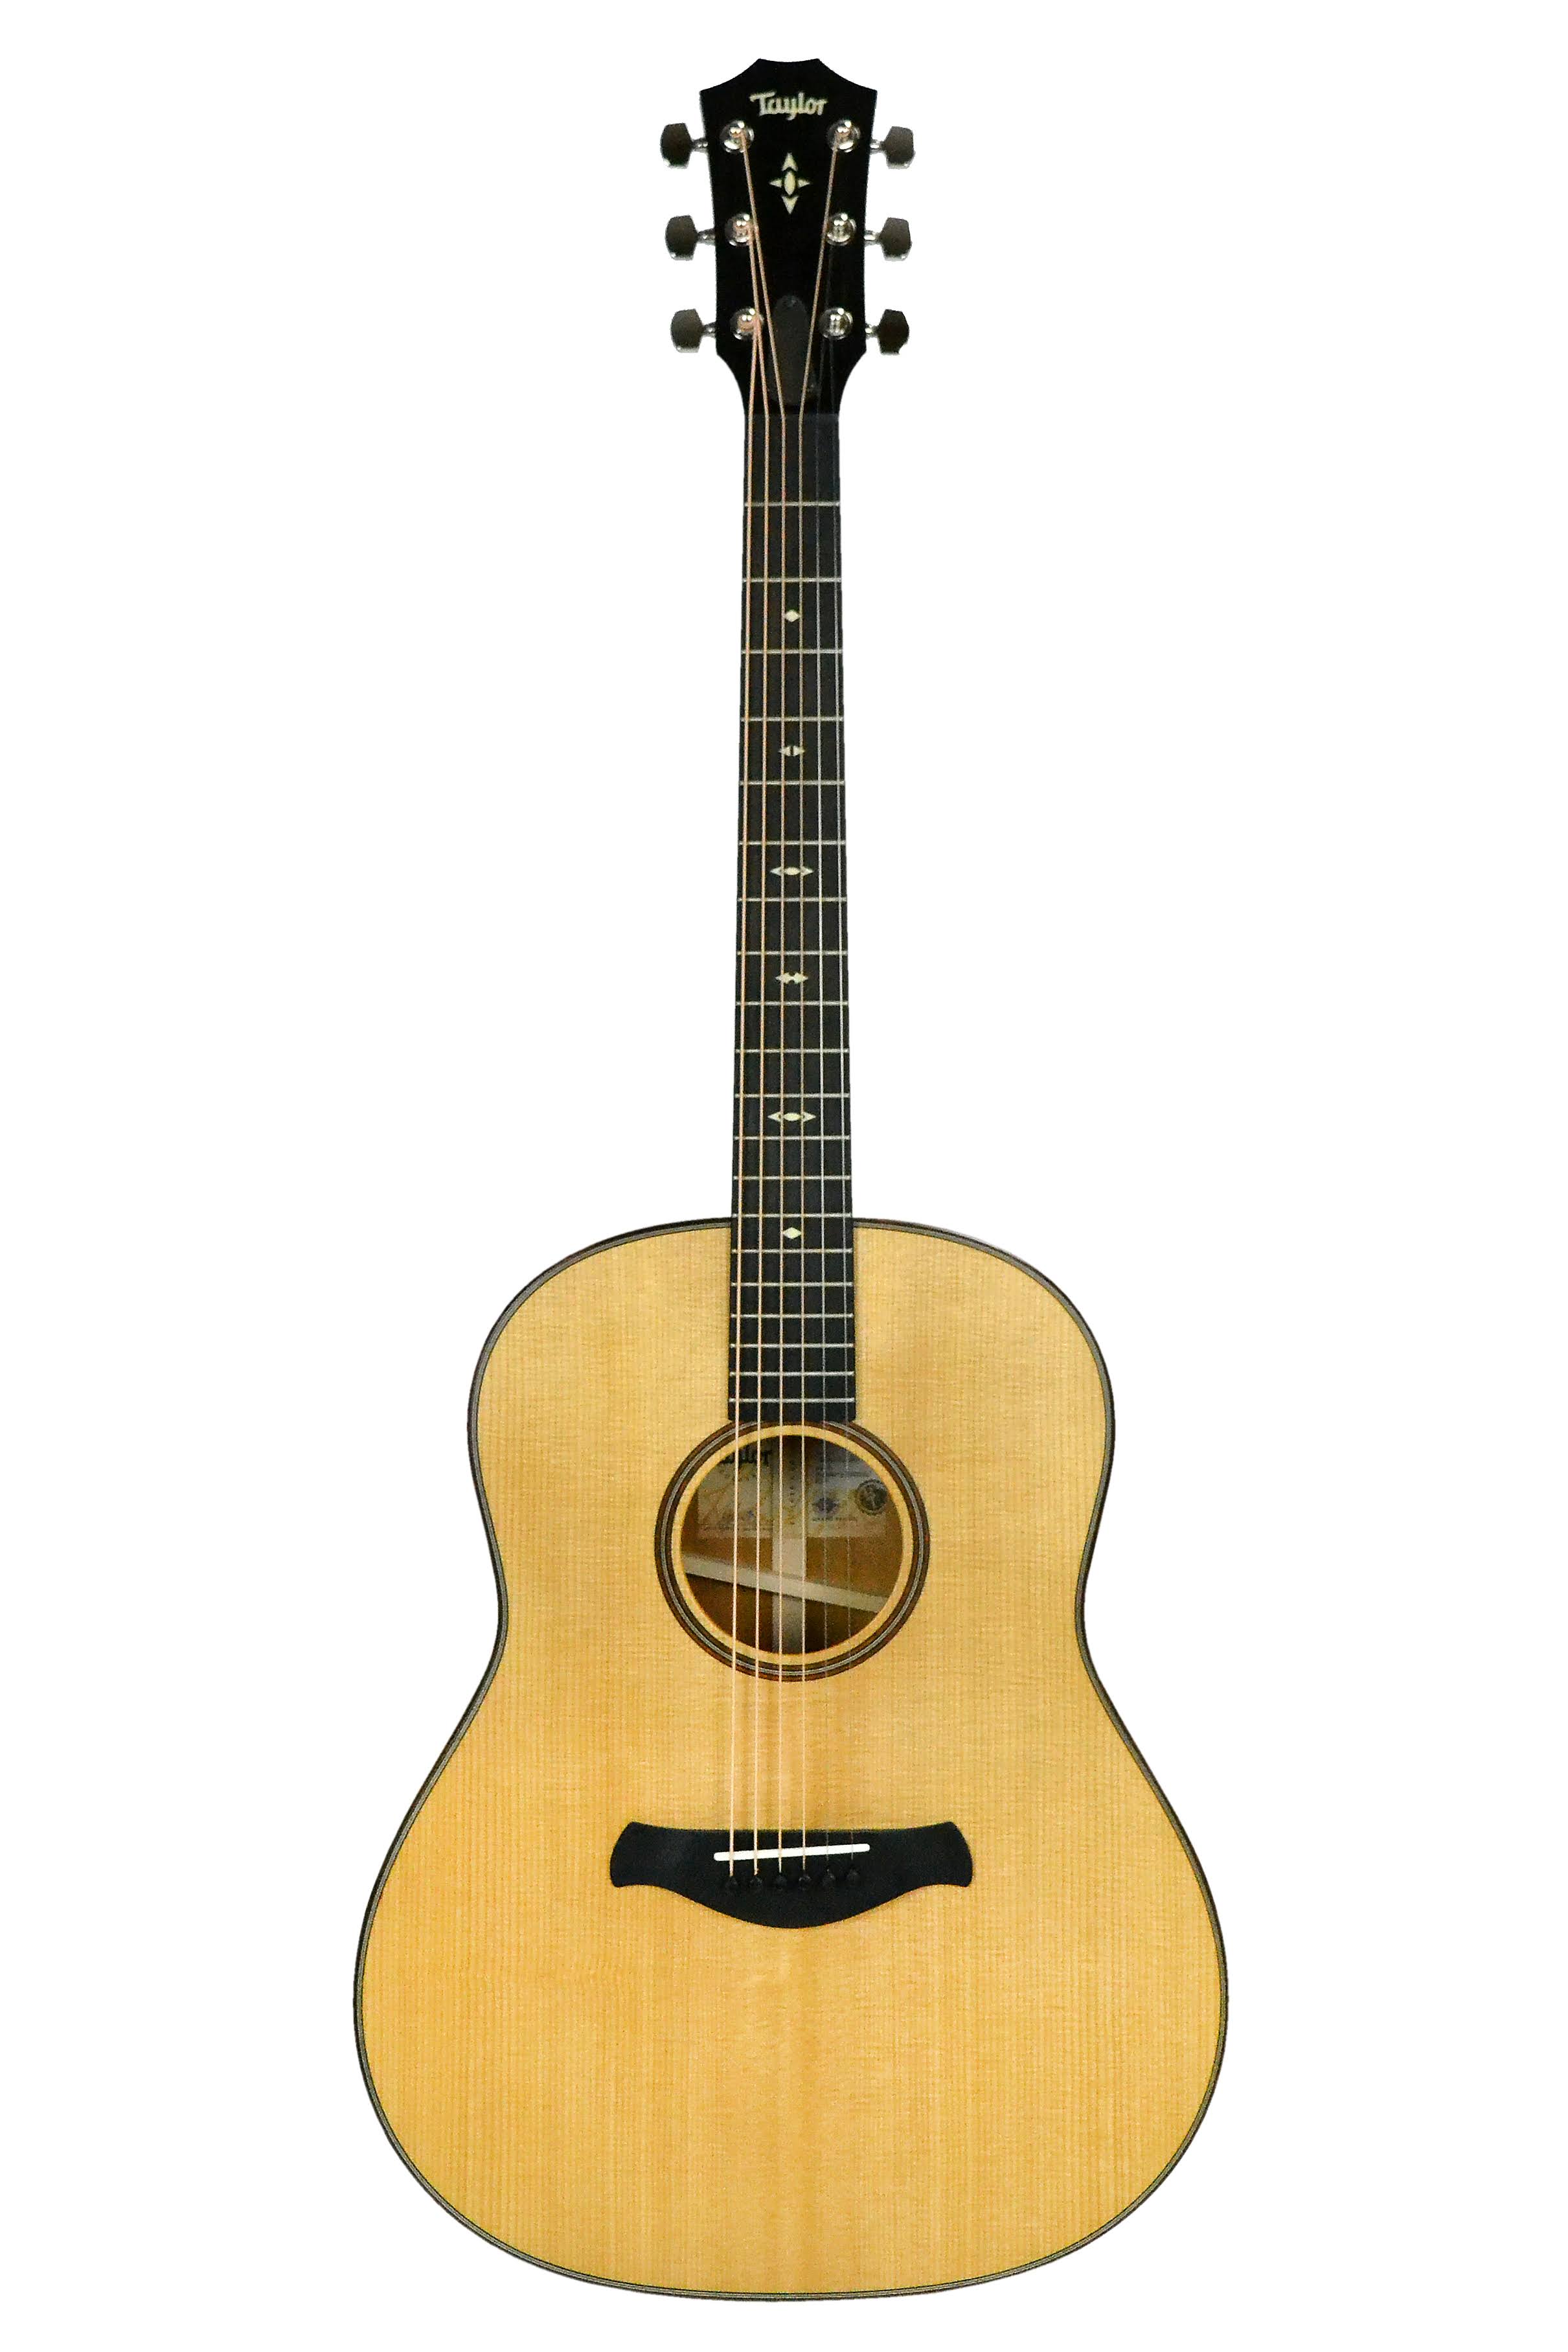 Taylor 517 Grand Pacific Builder's Edition Acoustic Guitar, Natural